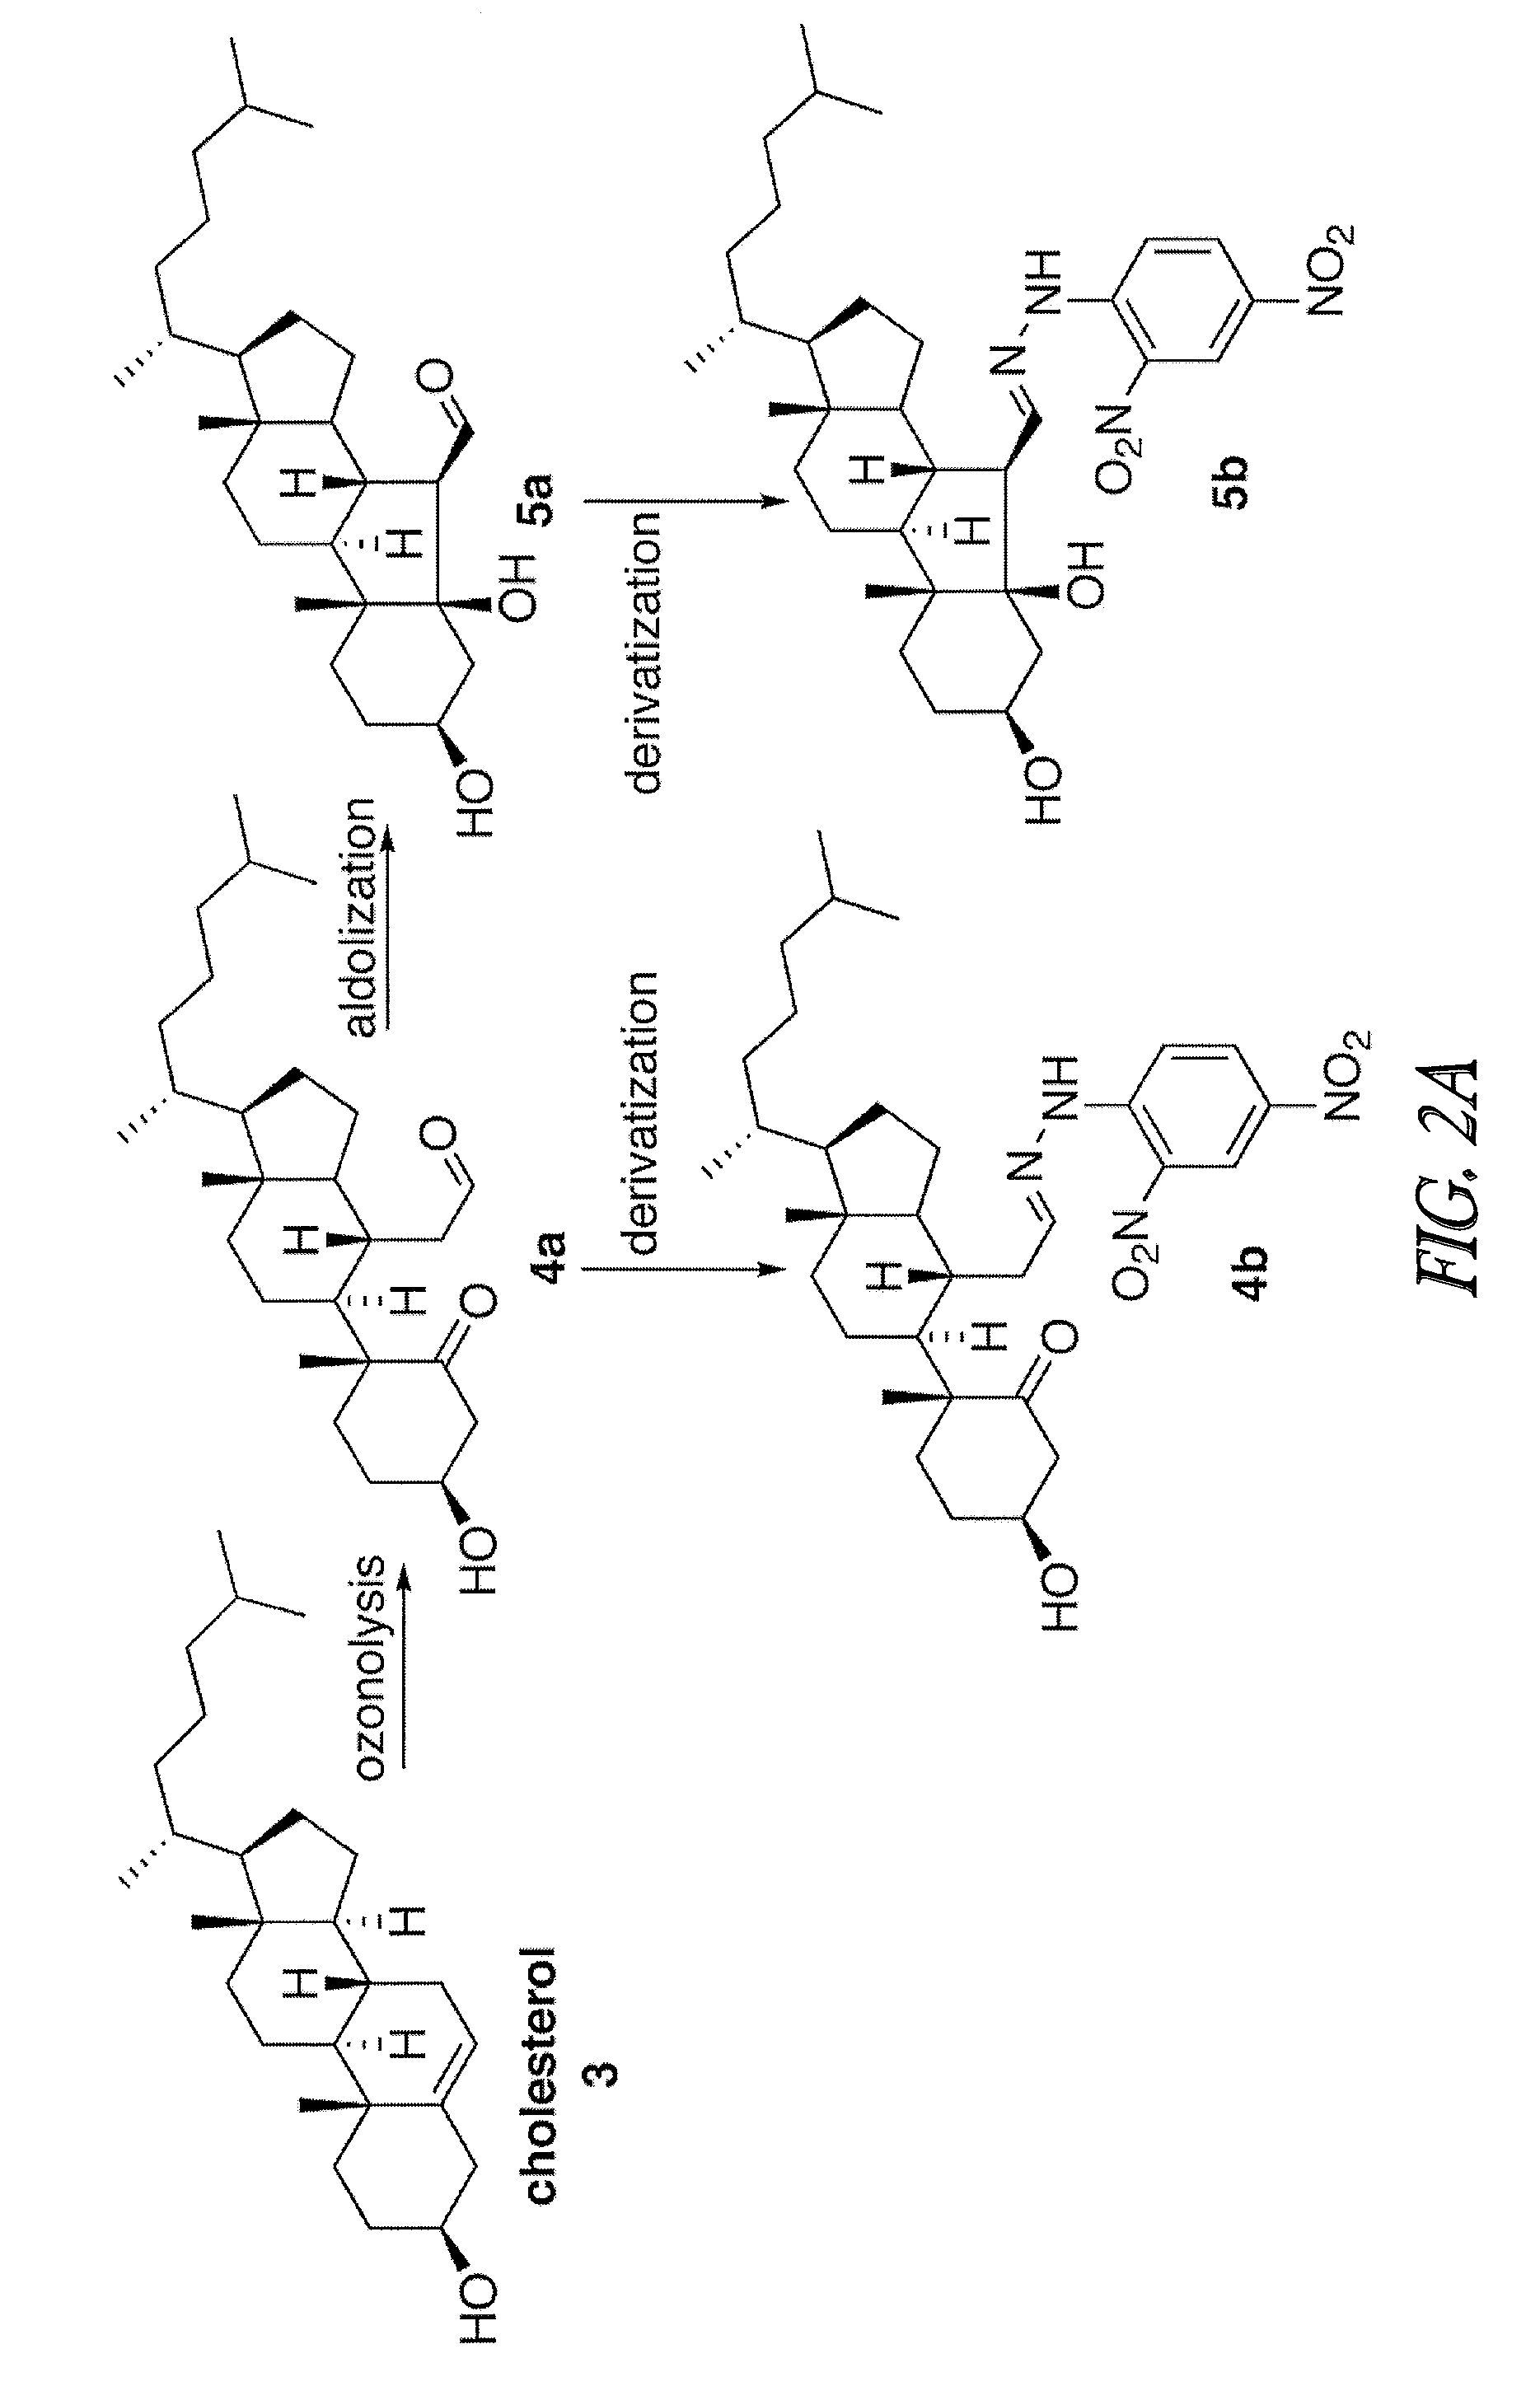 Methods to identify therapeutic agents